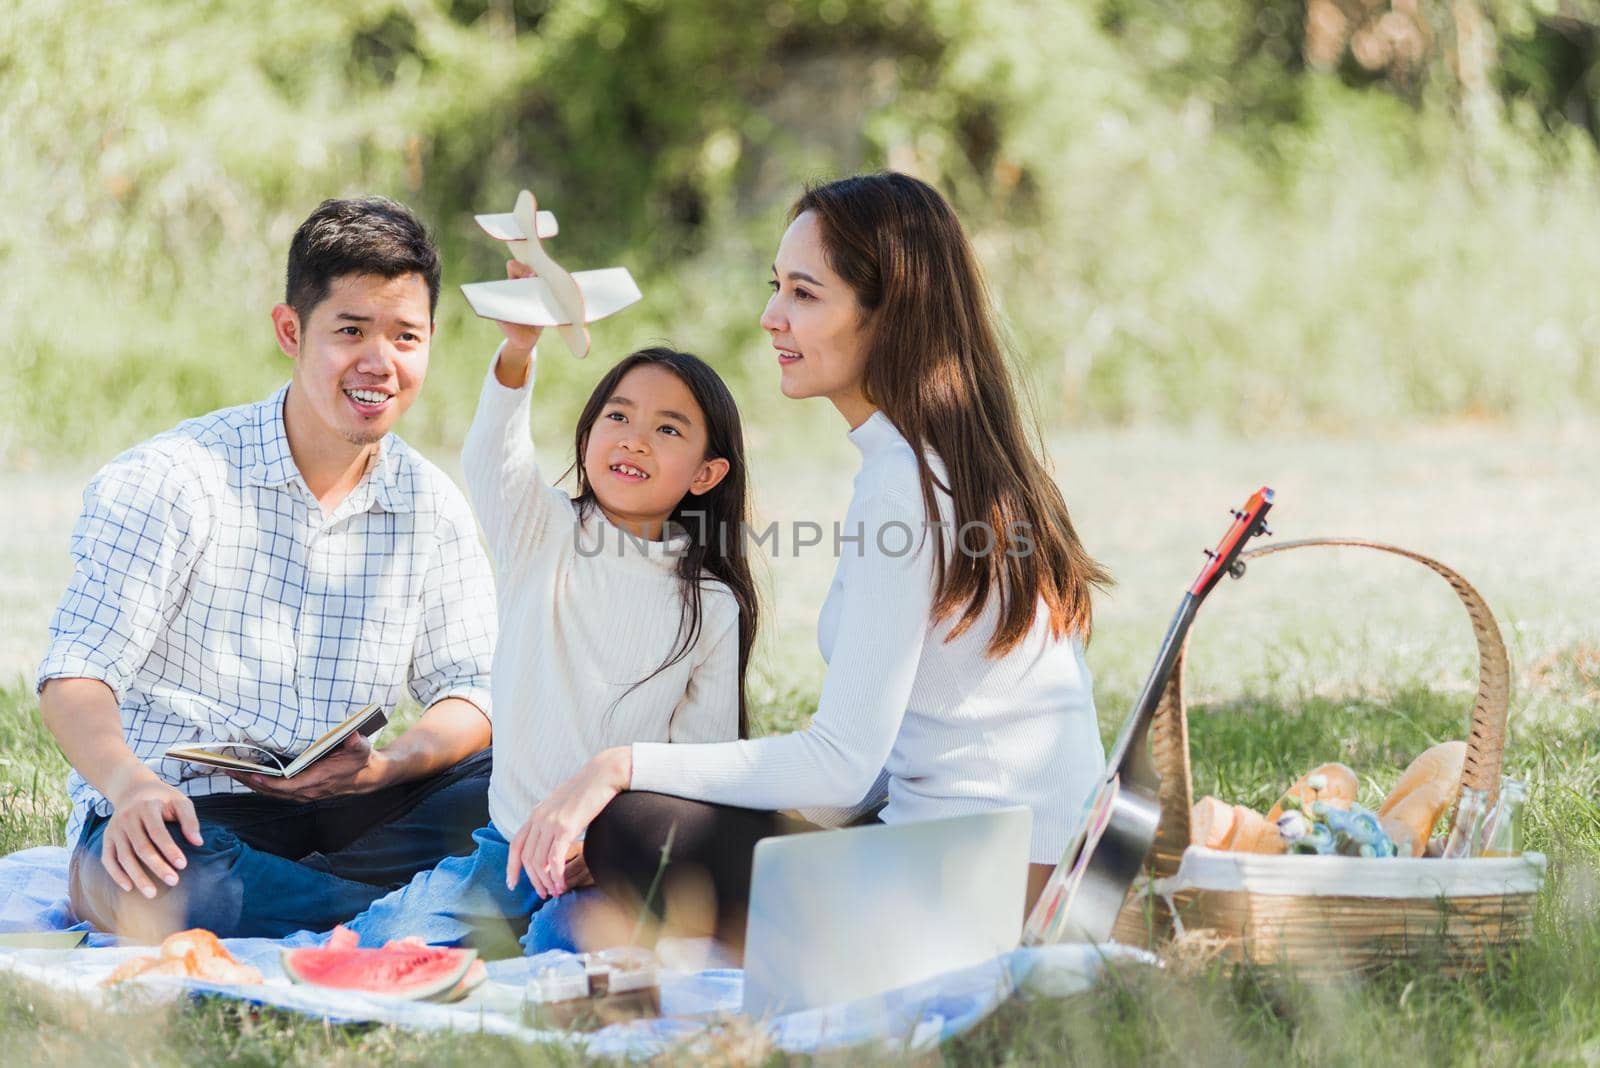 Happy family having fun and enjoying outdoor sitting on picnic blanket playing toy aircraft  by Sorapop